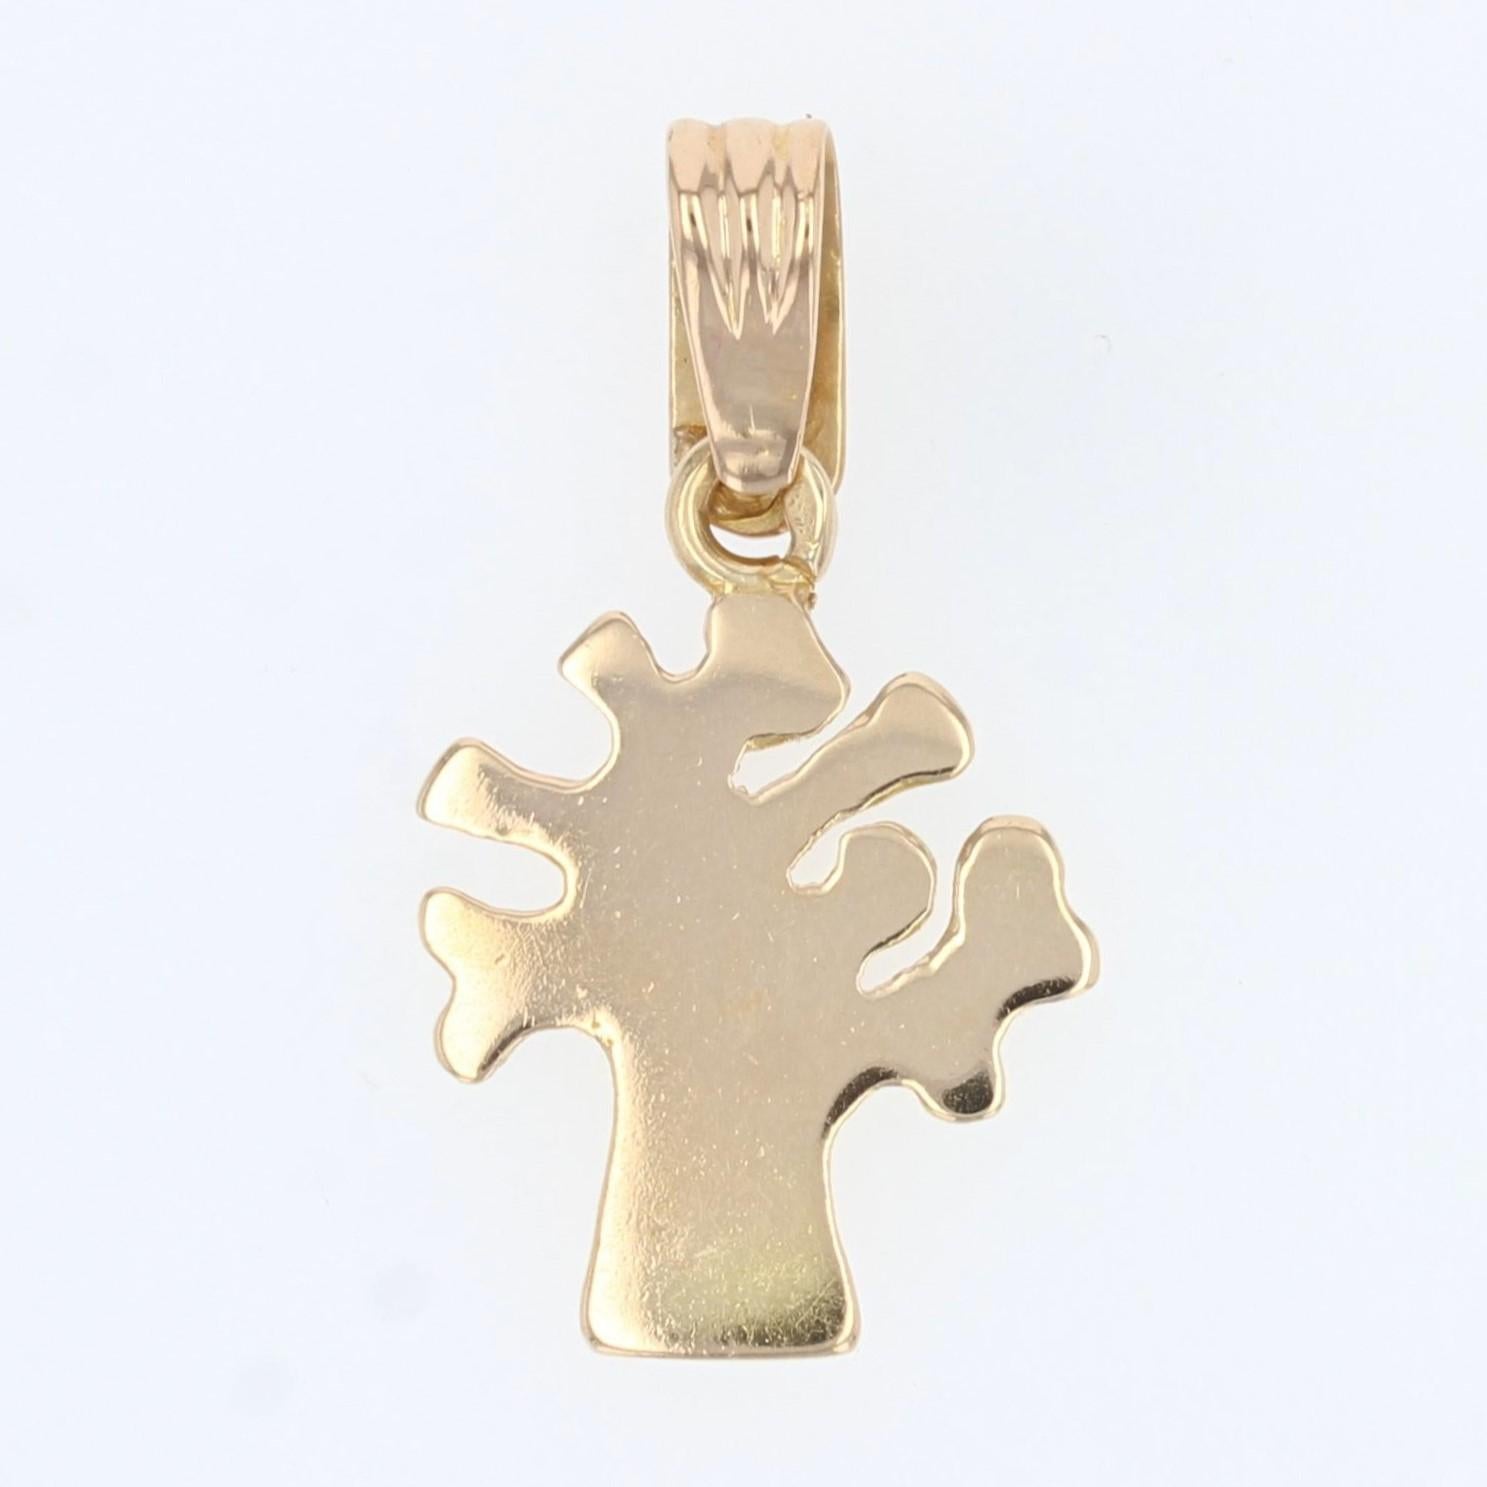 Pendant in 18 karat yellow gold.
This retro pendant represents a tree.
Height : 2,5 cm, width : 19 mm, thickness : 1,7 mm approximately.
Total weight of the jewel : 2,5 g approximately.
Authentic retro jewel - Work of the 1960s.

Specialized in